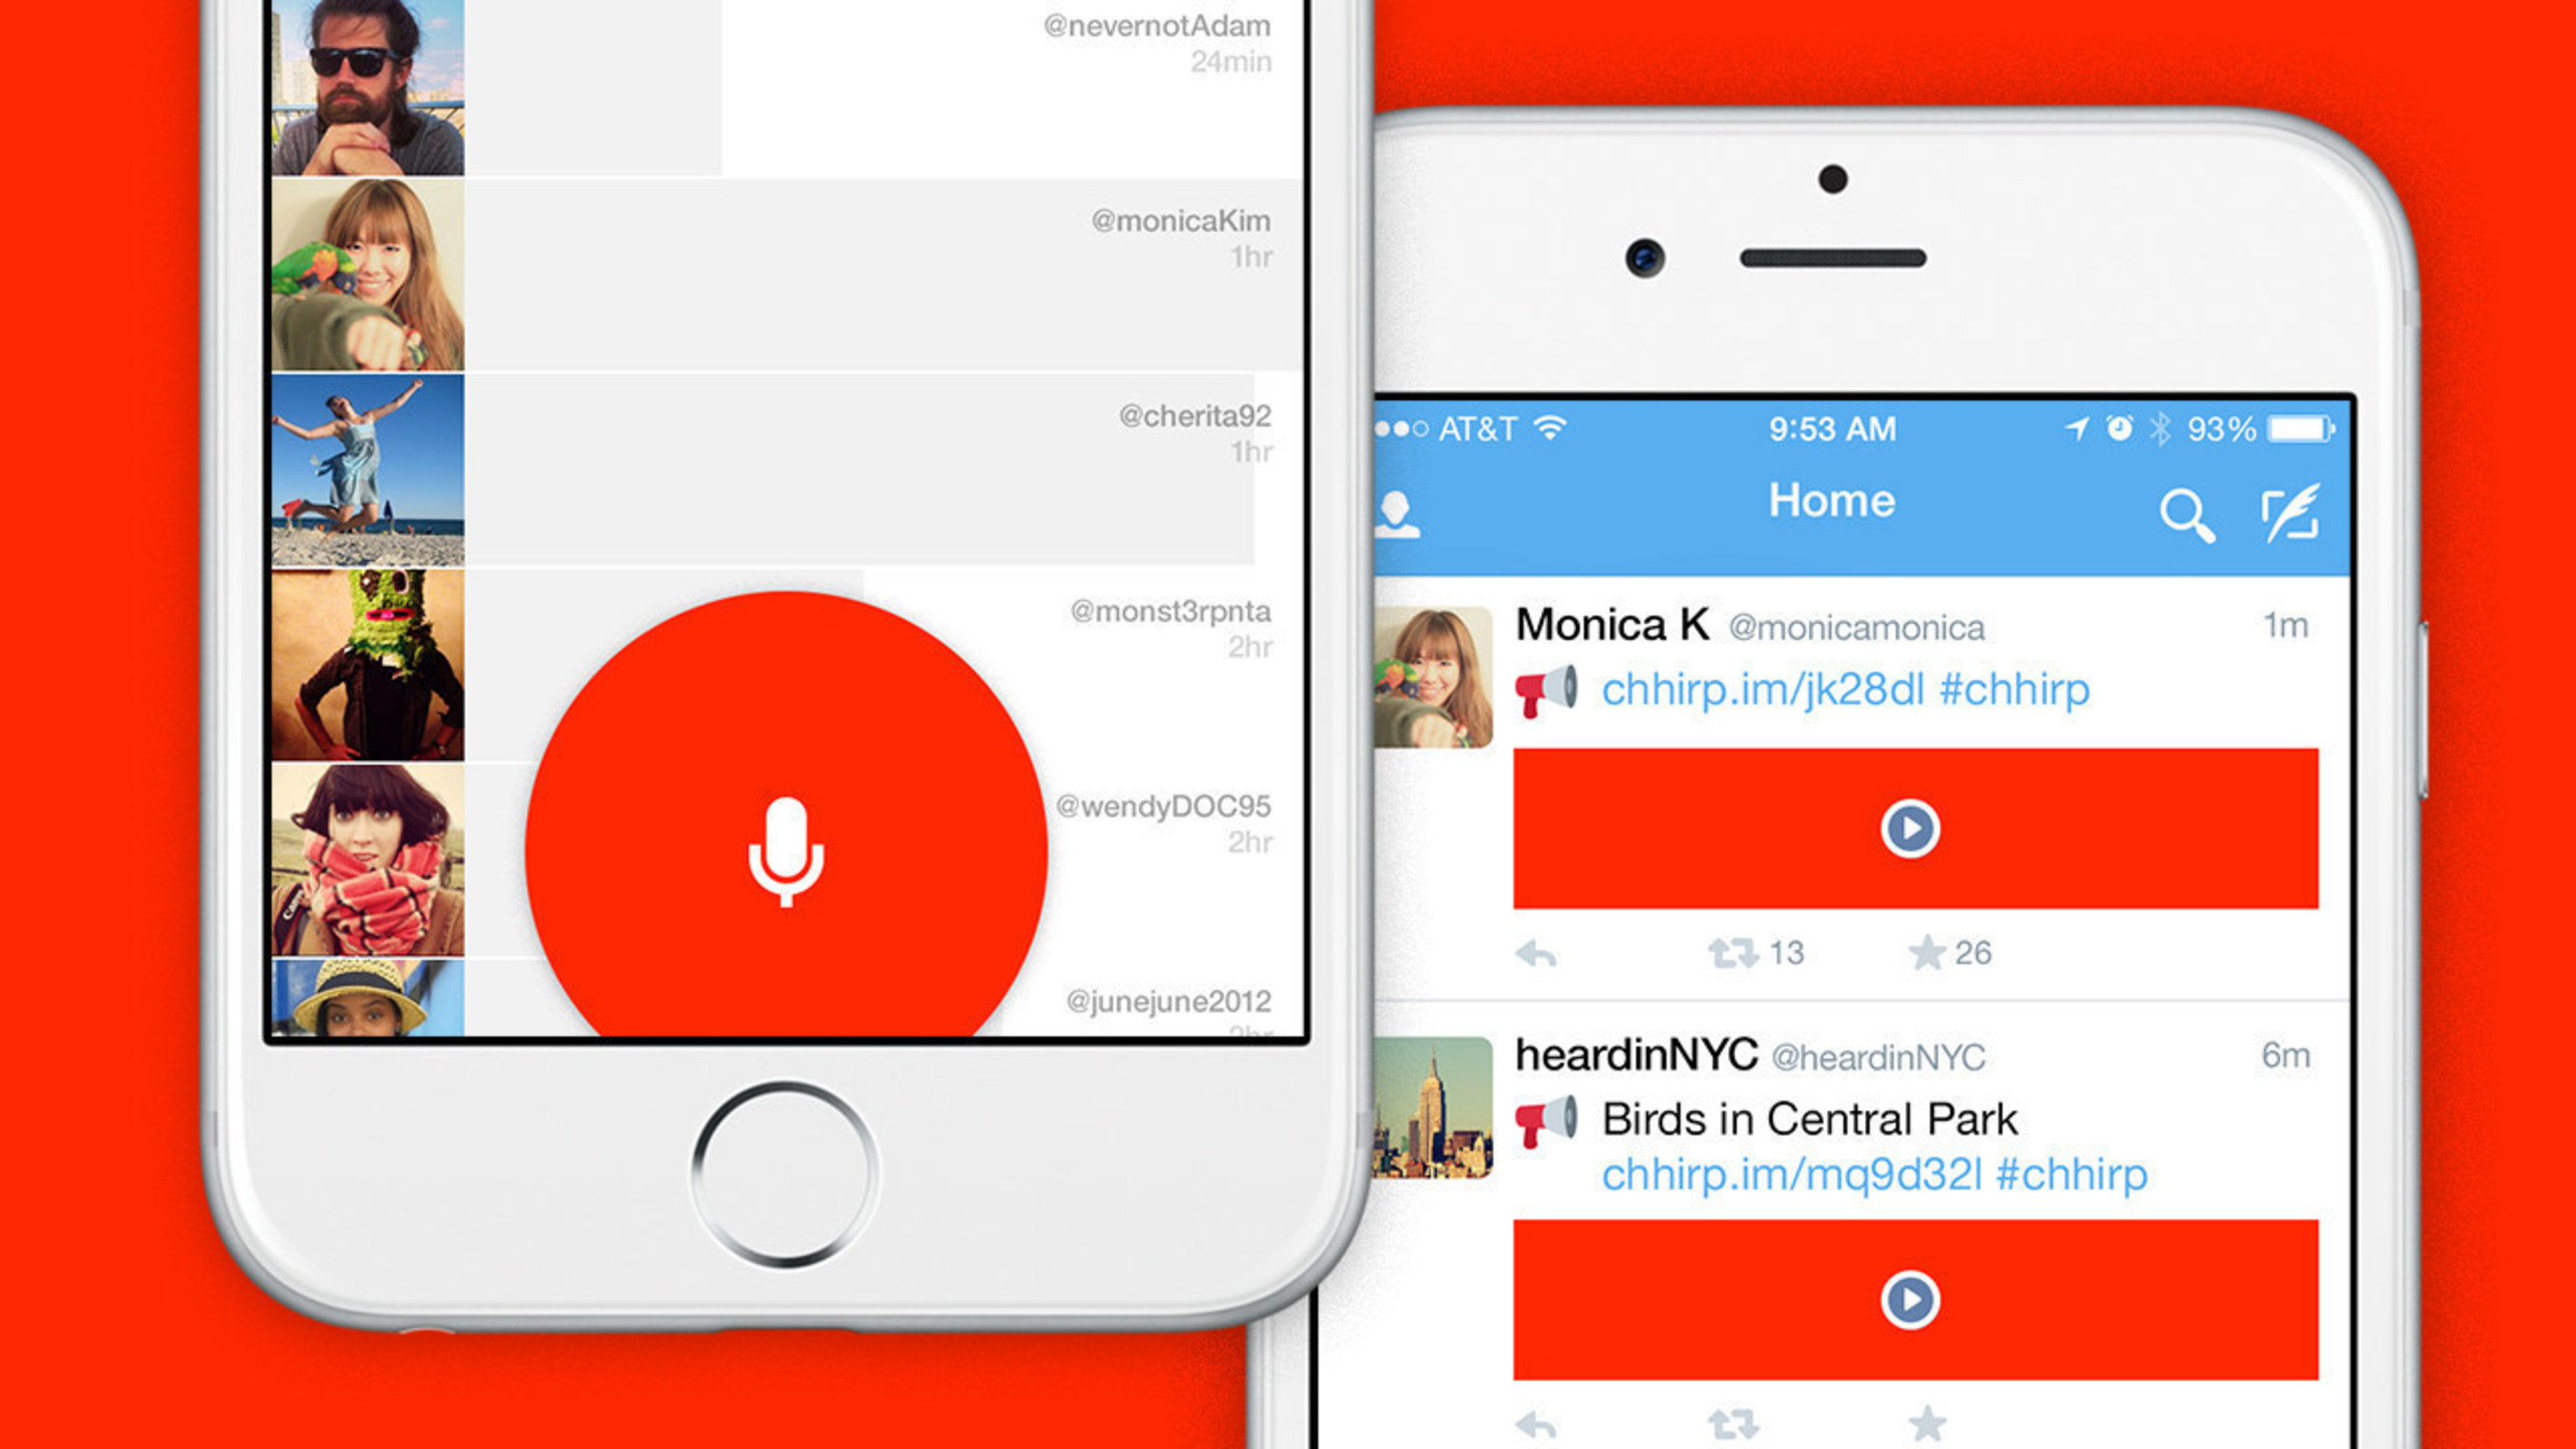 Chhirp is a free iPhone app that works as a mic for Twitter.